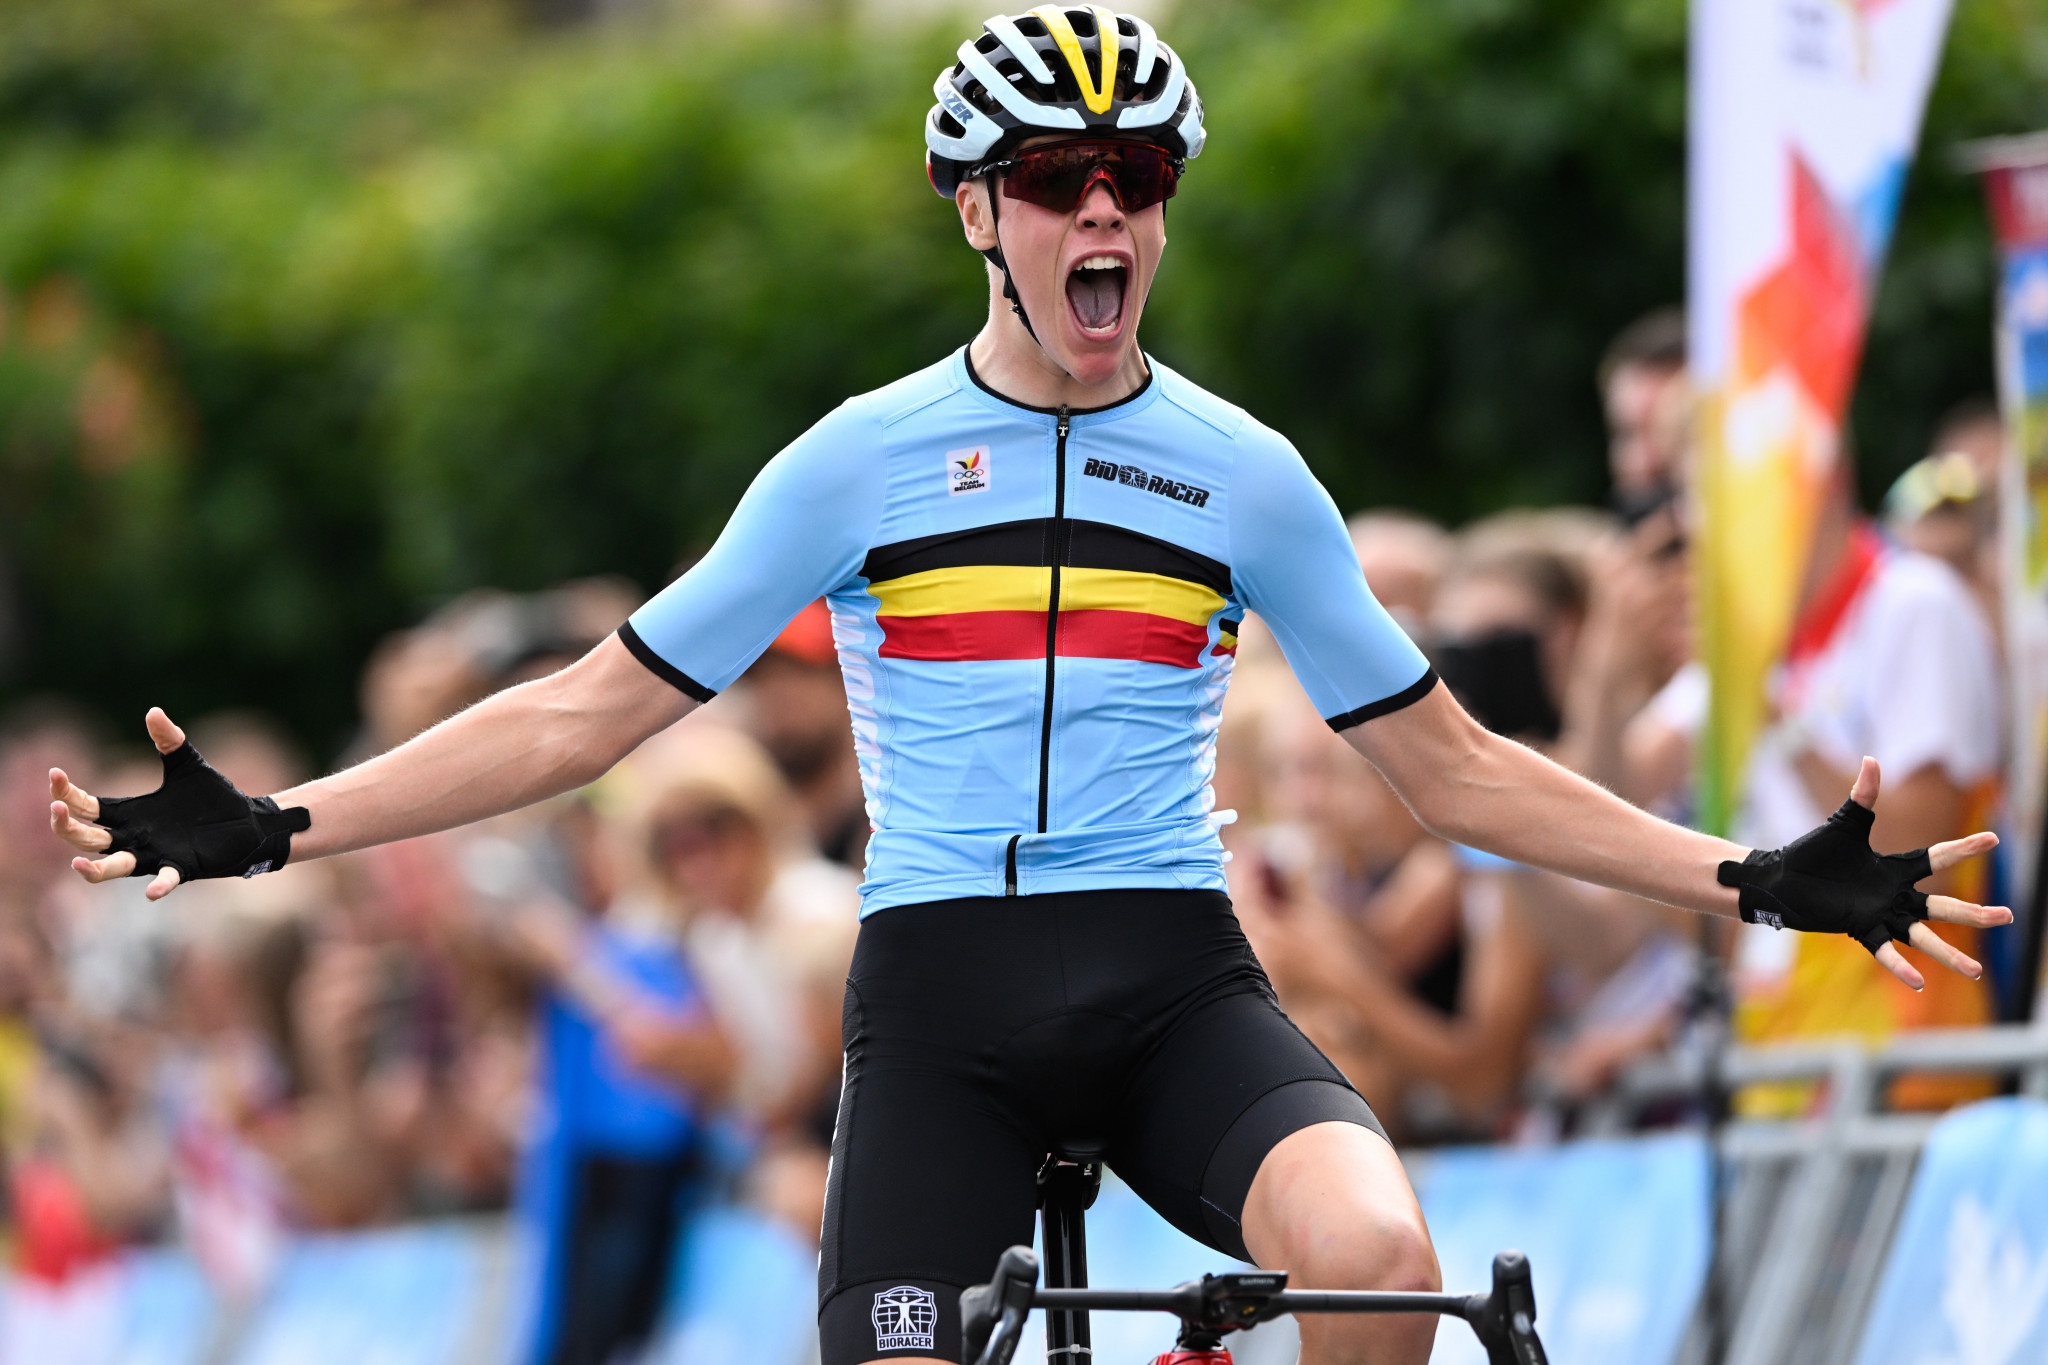 Cedric Keppens of Belgium was victorious in the boys' road race - which was 65.8km  long - as he crossed the line in 1:32:33 ©EYOF Banská Bystrica 2022